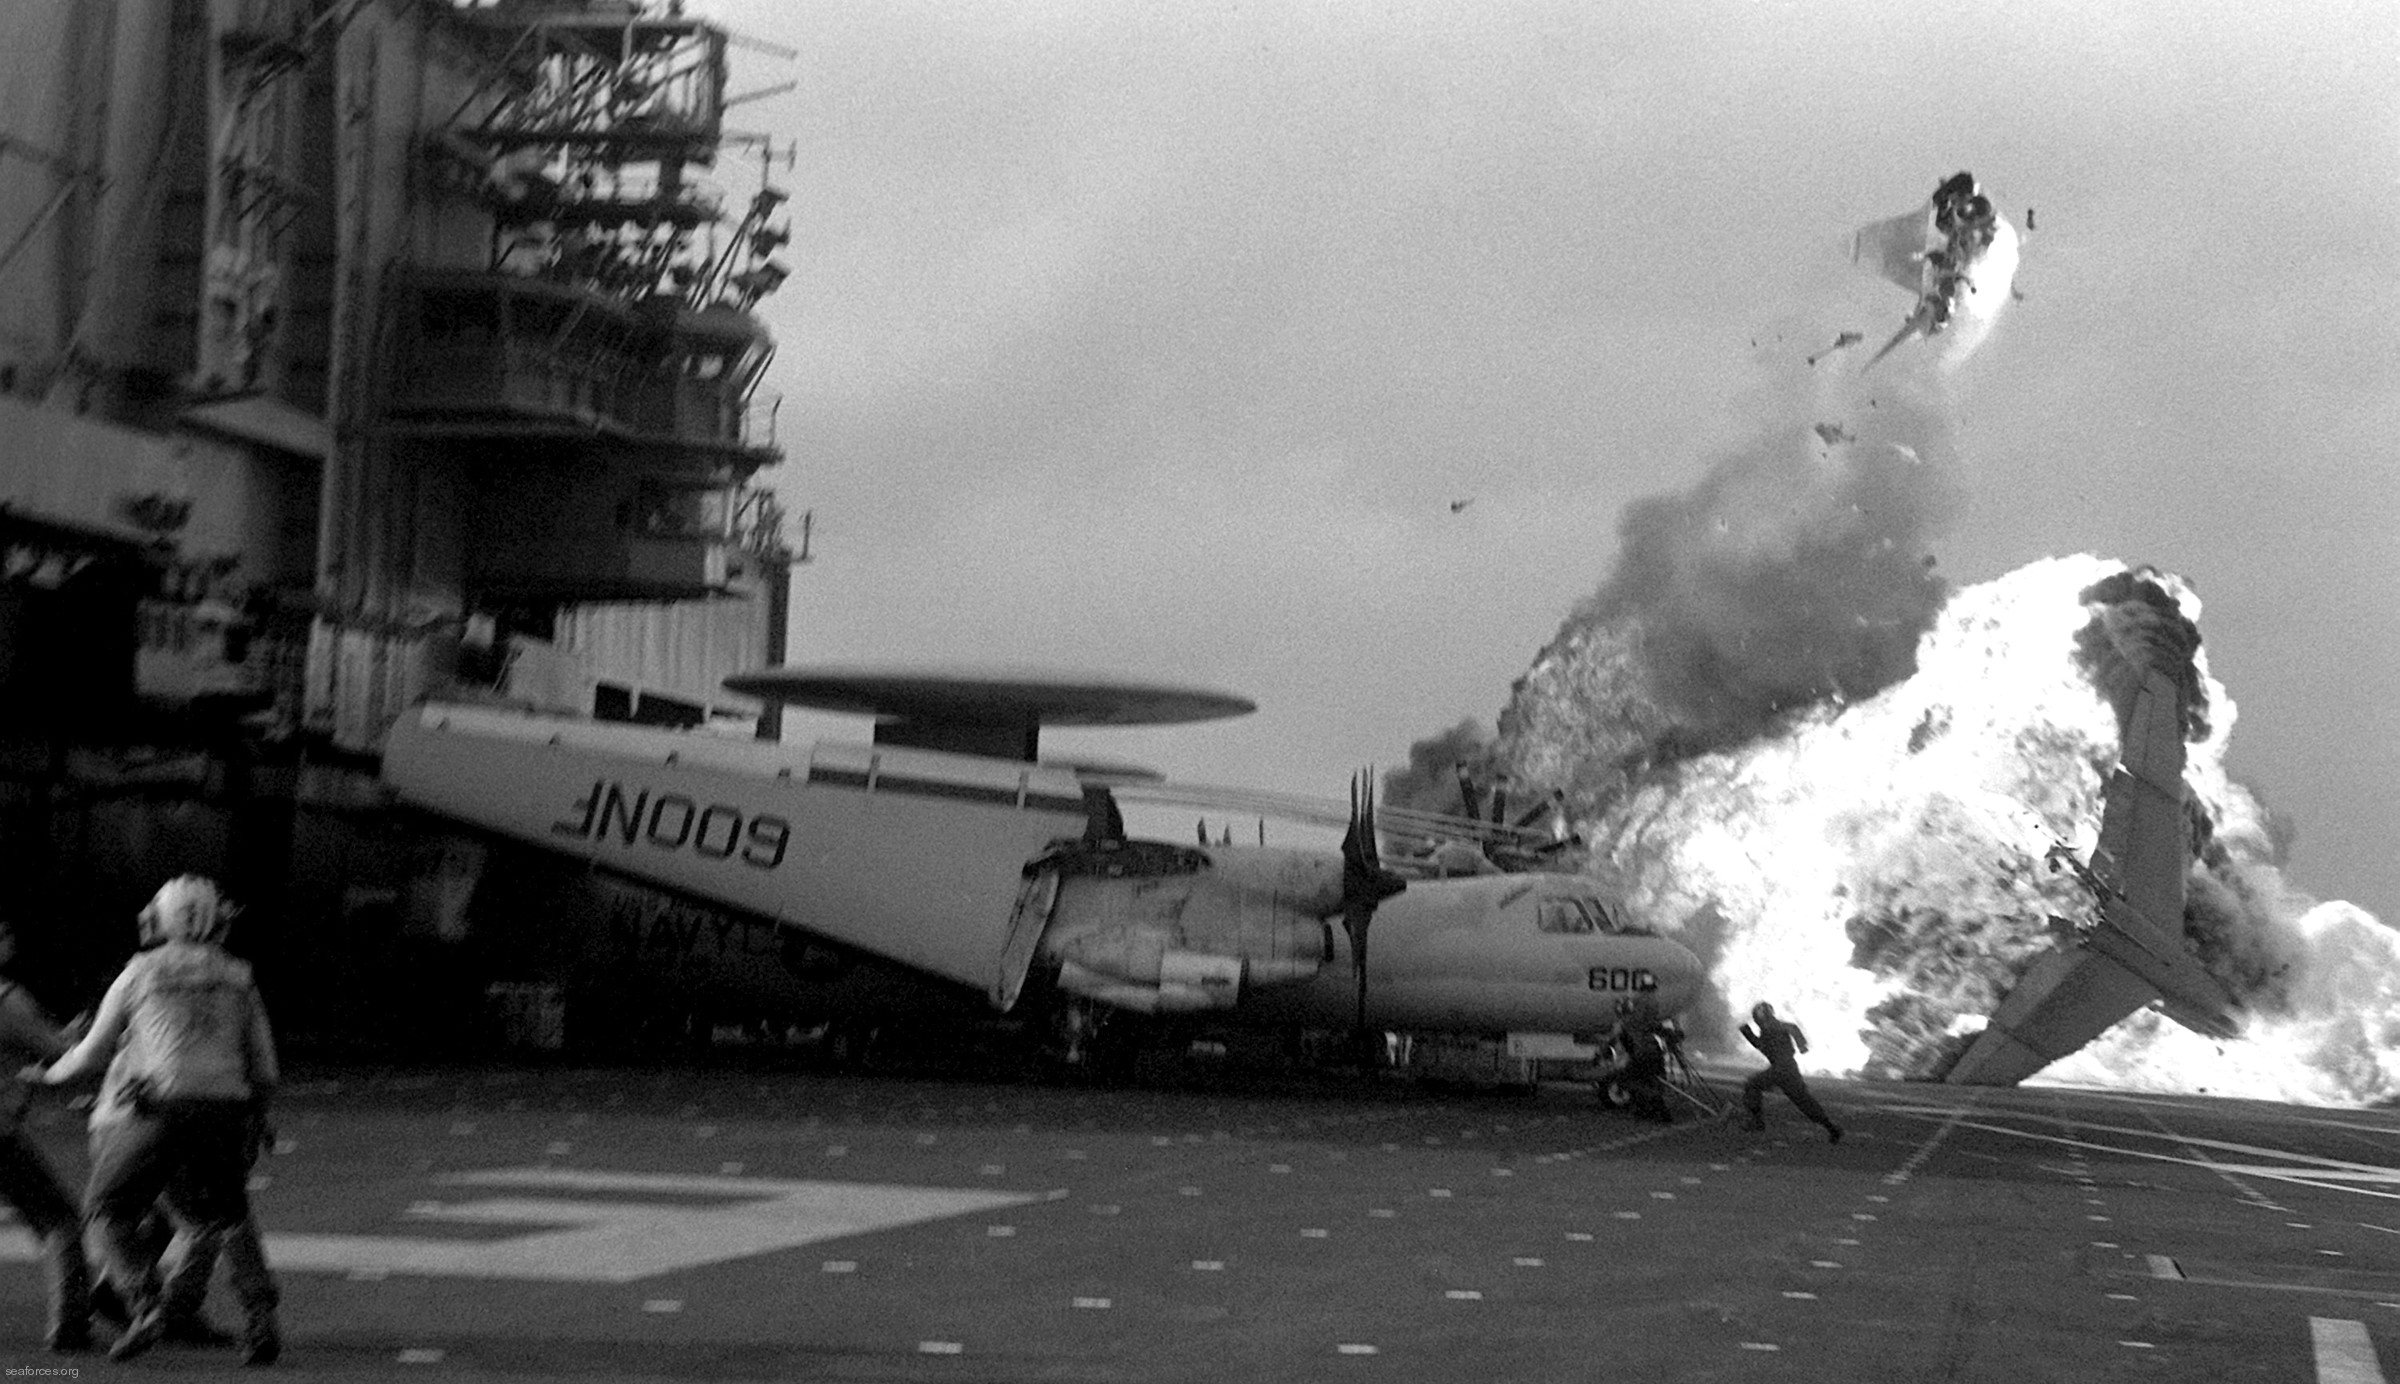 cv-41 uss midway aircraft carrier air wing cvw-5 us navy 14 accident landing explosion ramp strike